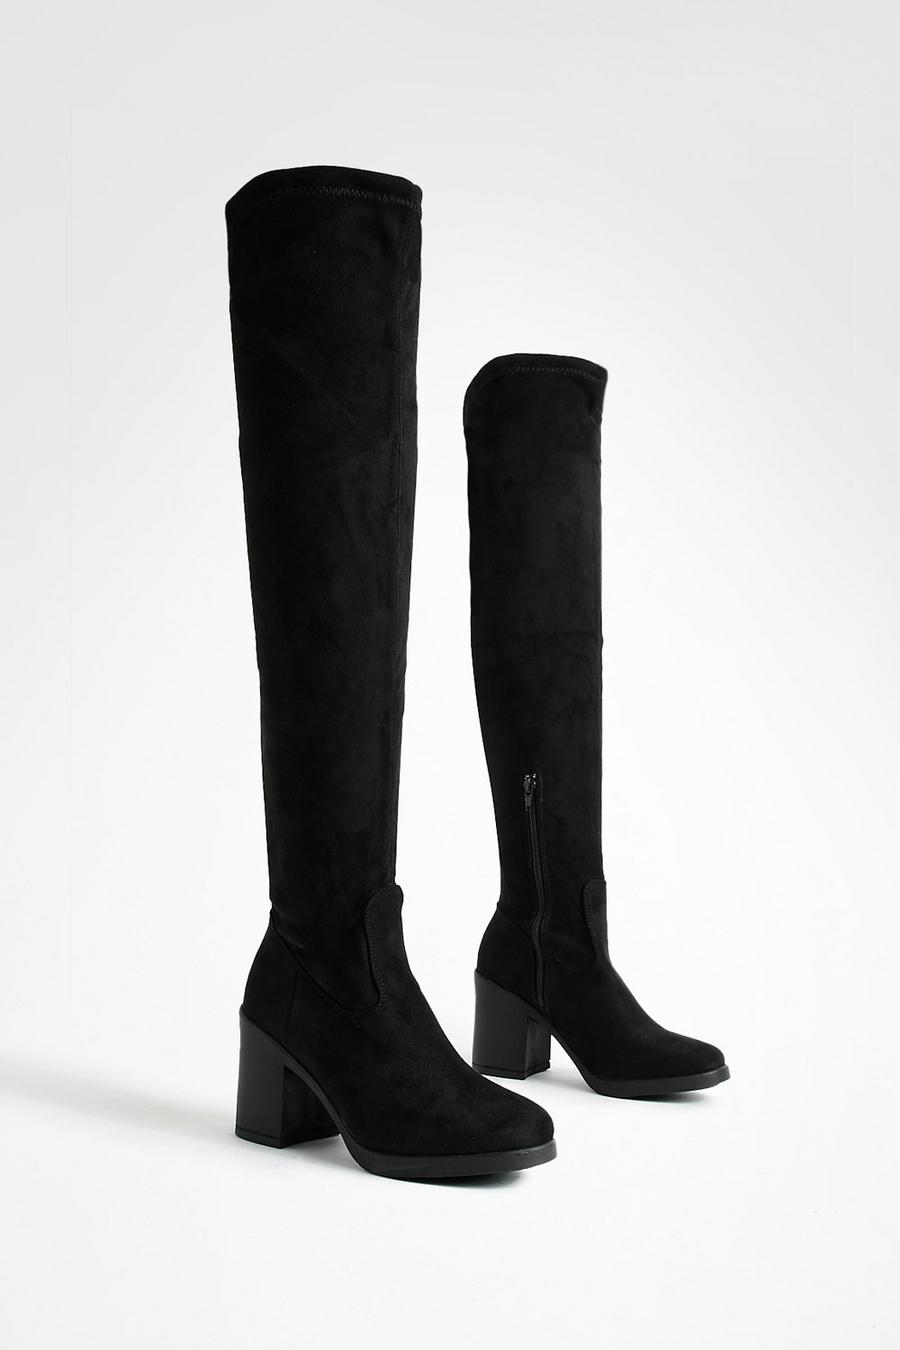 Black Chunky Over The Knee High Boots